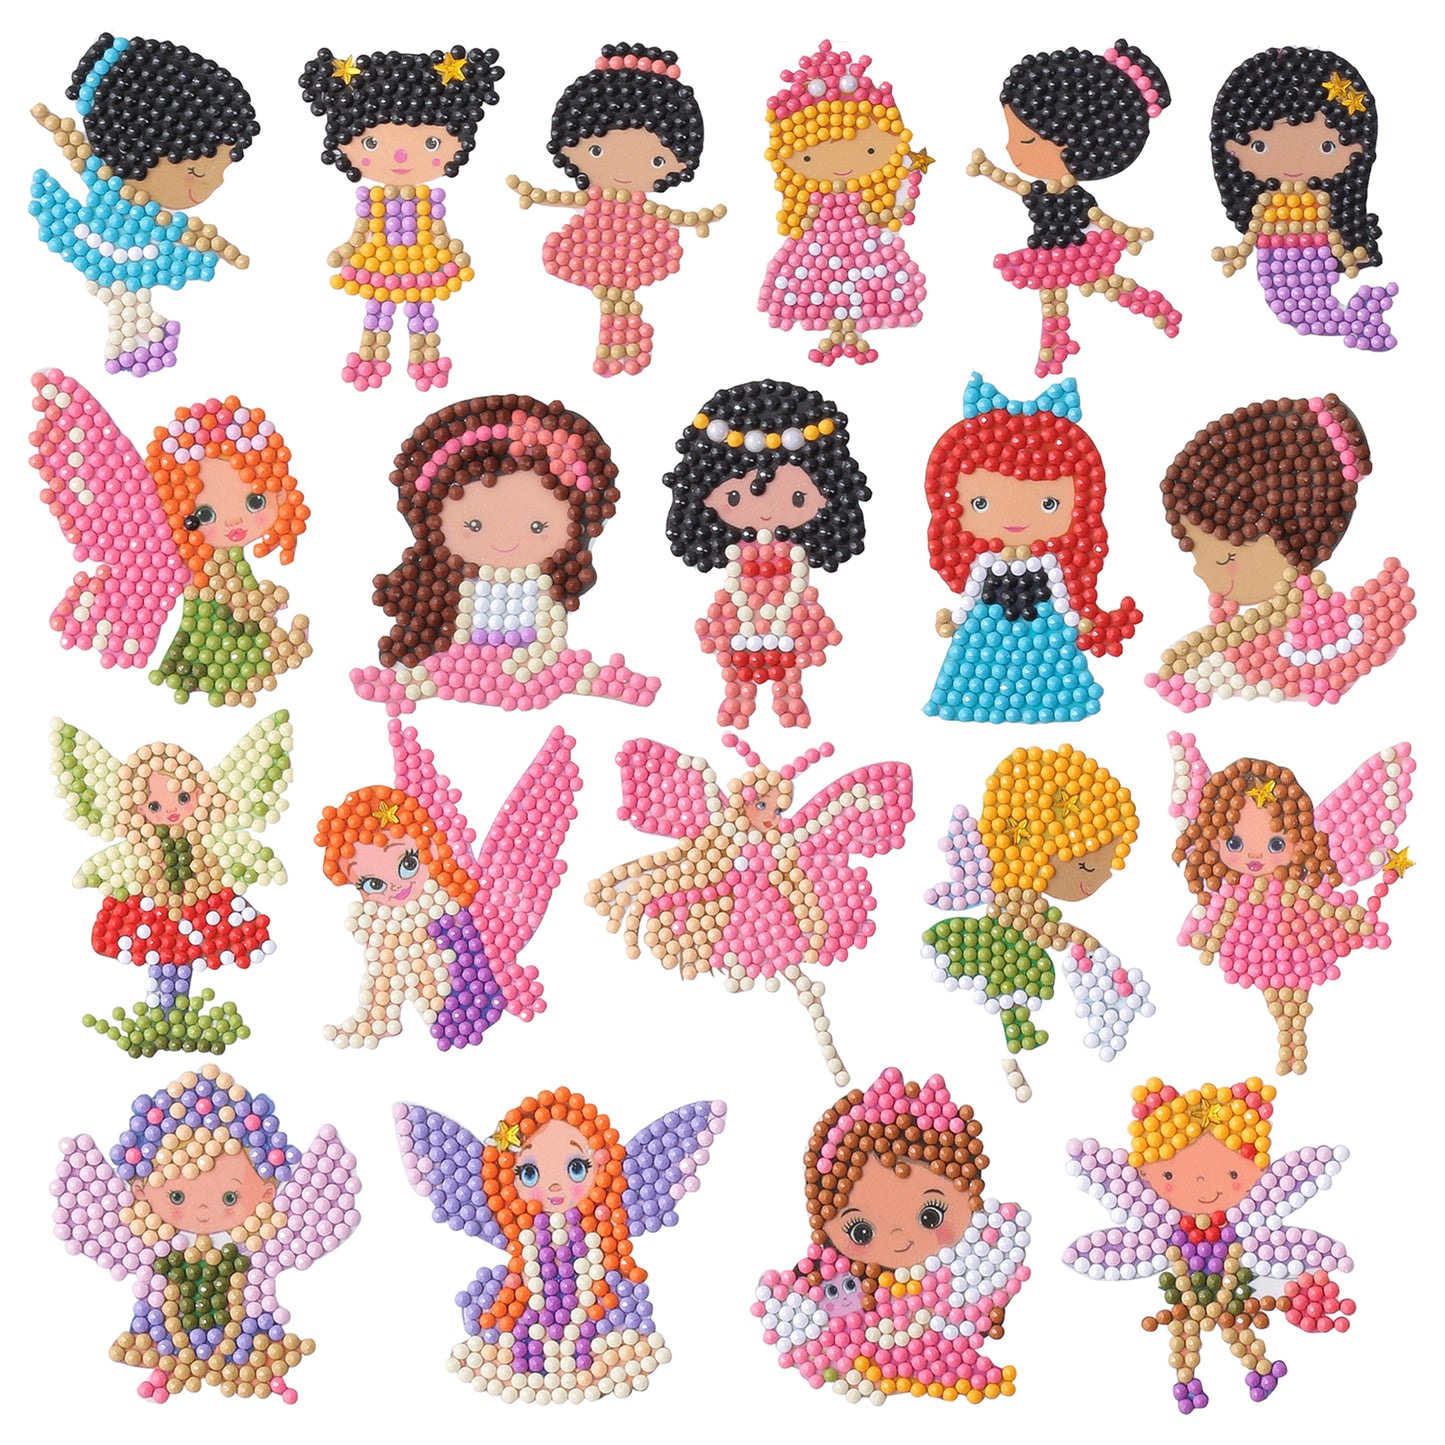 5D Diamond Painting Kit Different Styles Cute Baby Girls Diamond Stickers Paint by Numbers Art Craft For Kids Gift